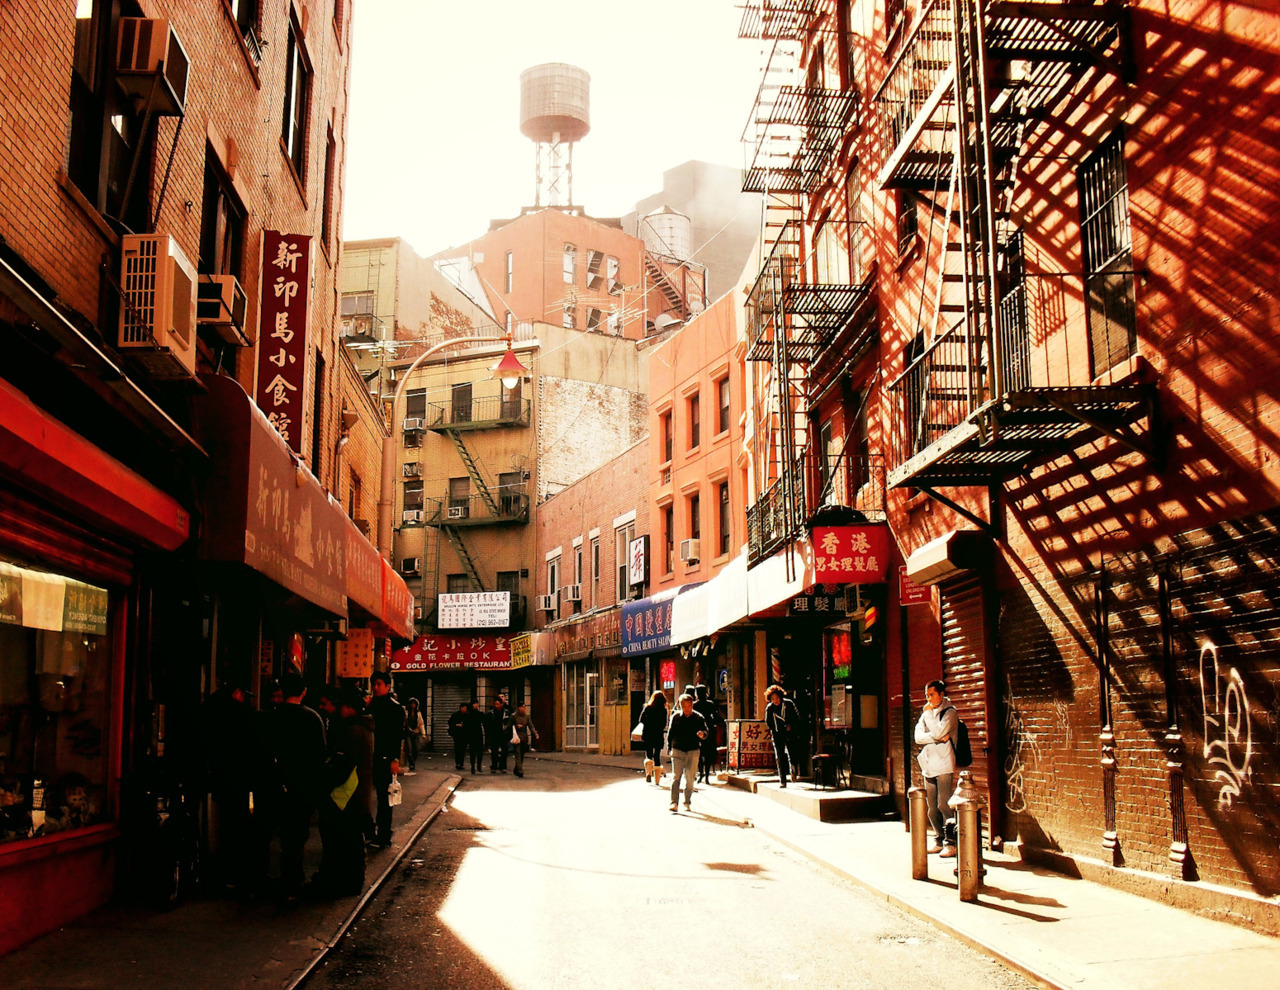 Colorful photos of Chinatown in New York City | BOOMSbeat1280 x 990